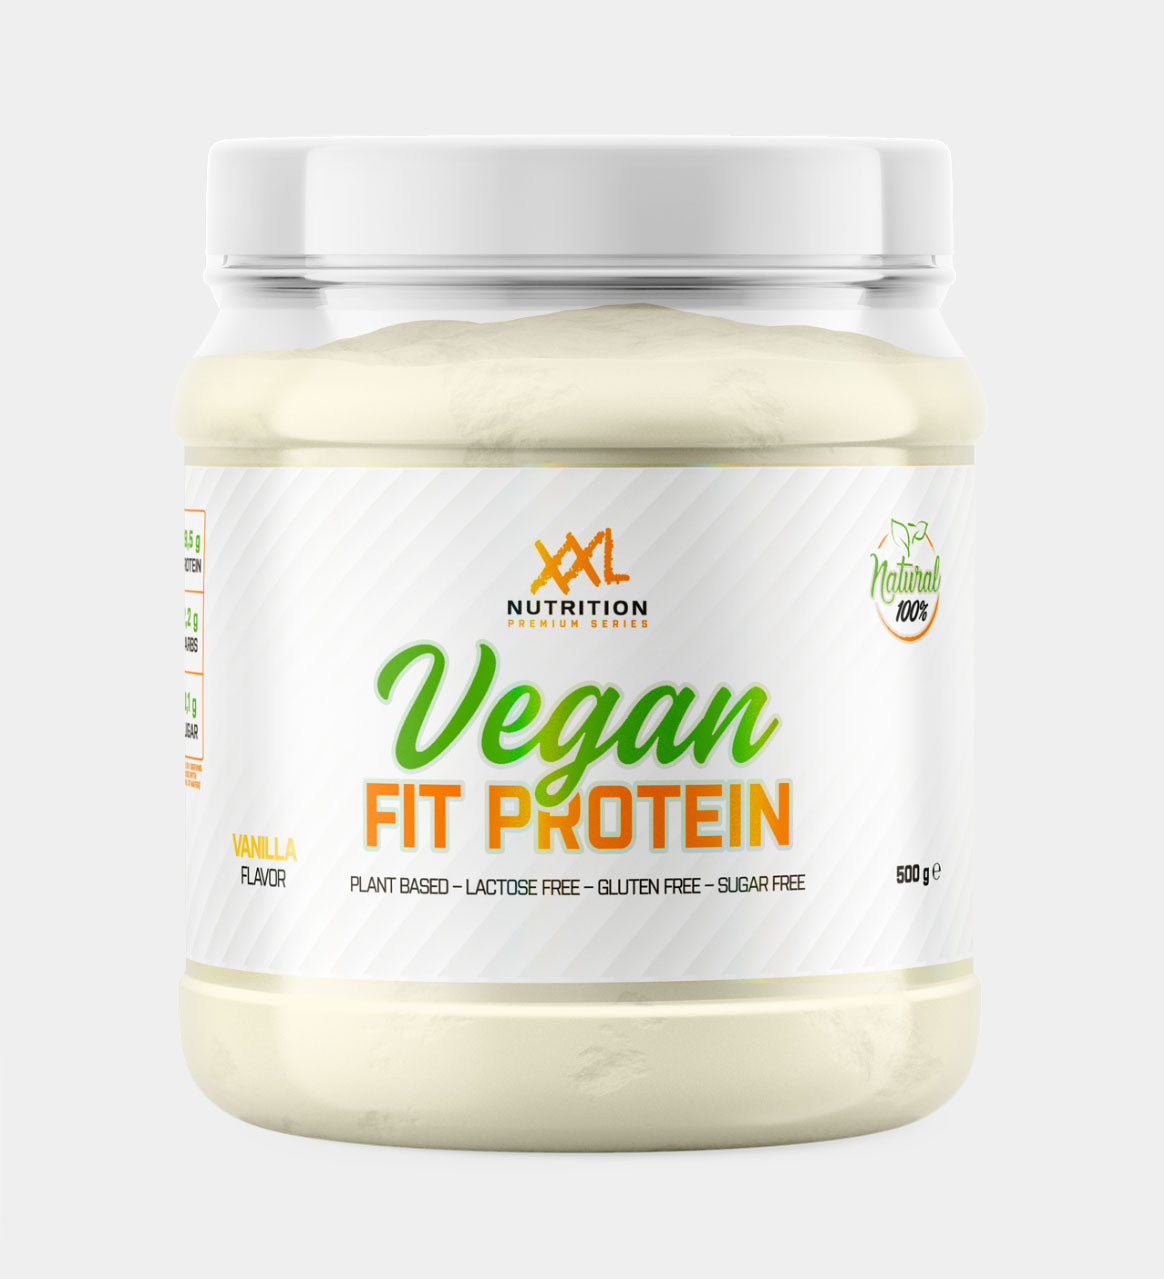 XXL Nutrition - Vegan Fit Protein - Booster Fight Store